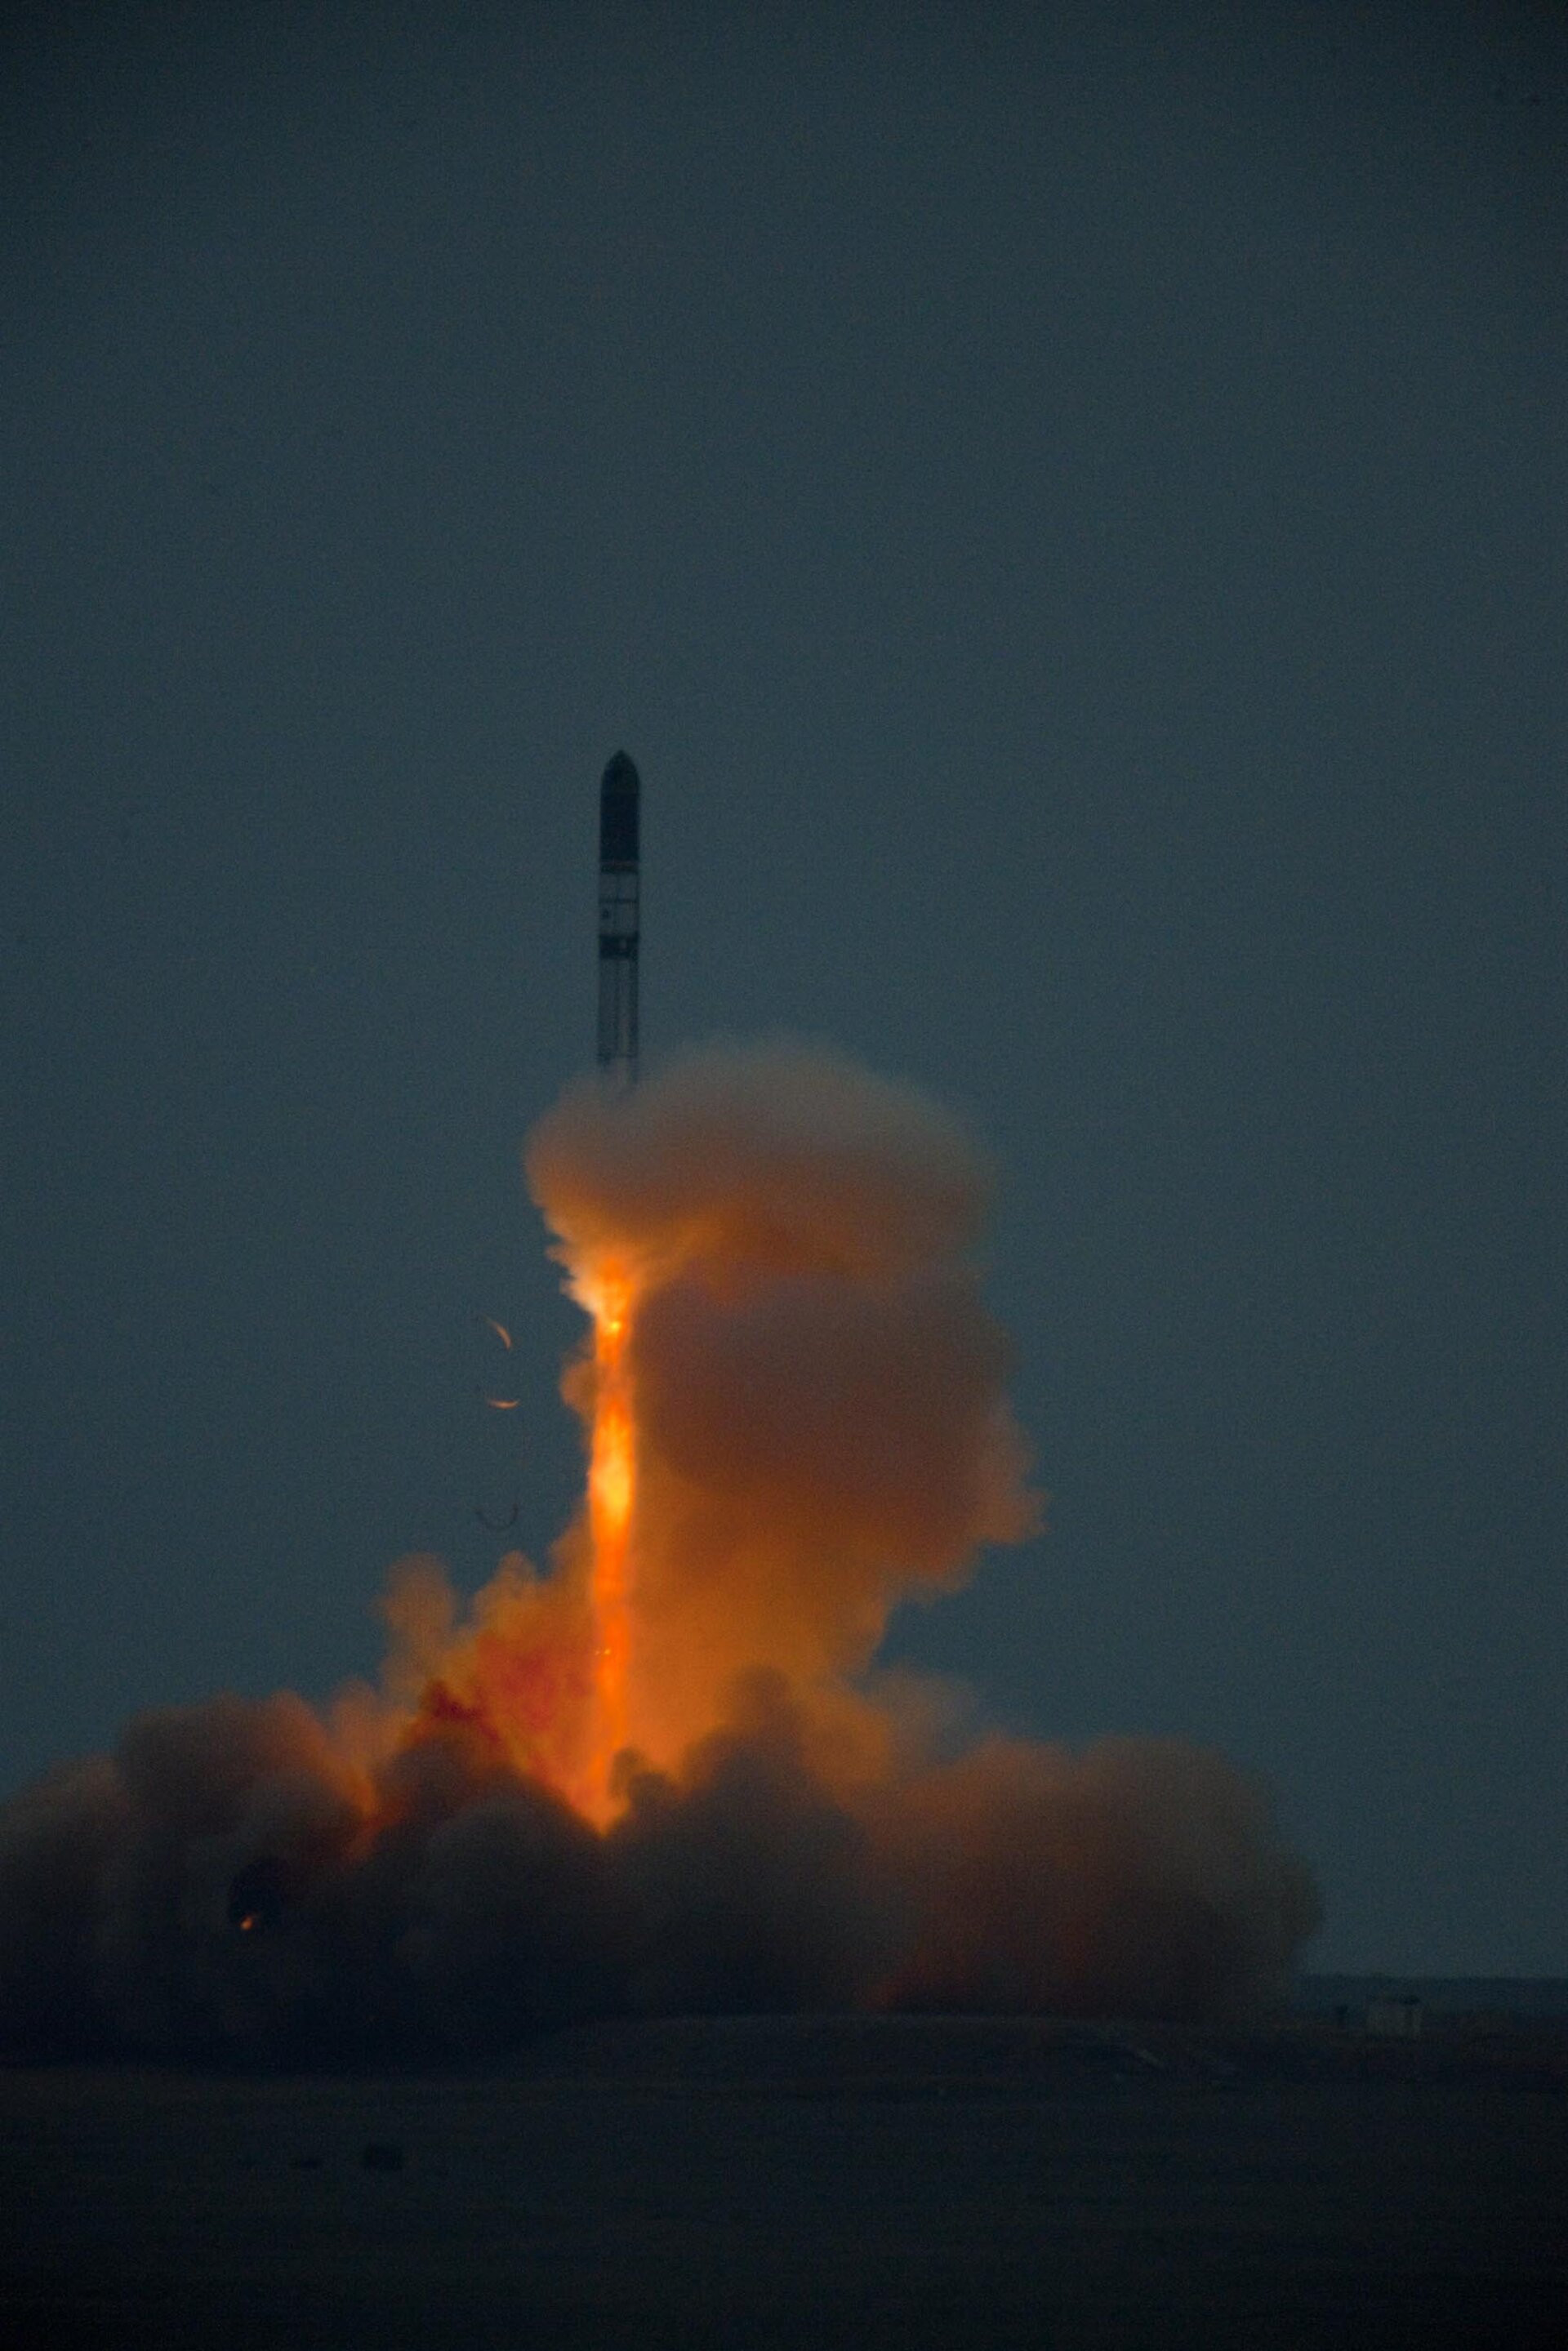 Successful launch for ESA’s CryoSat-2 ice mission